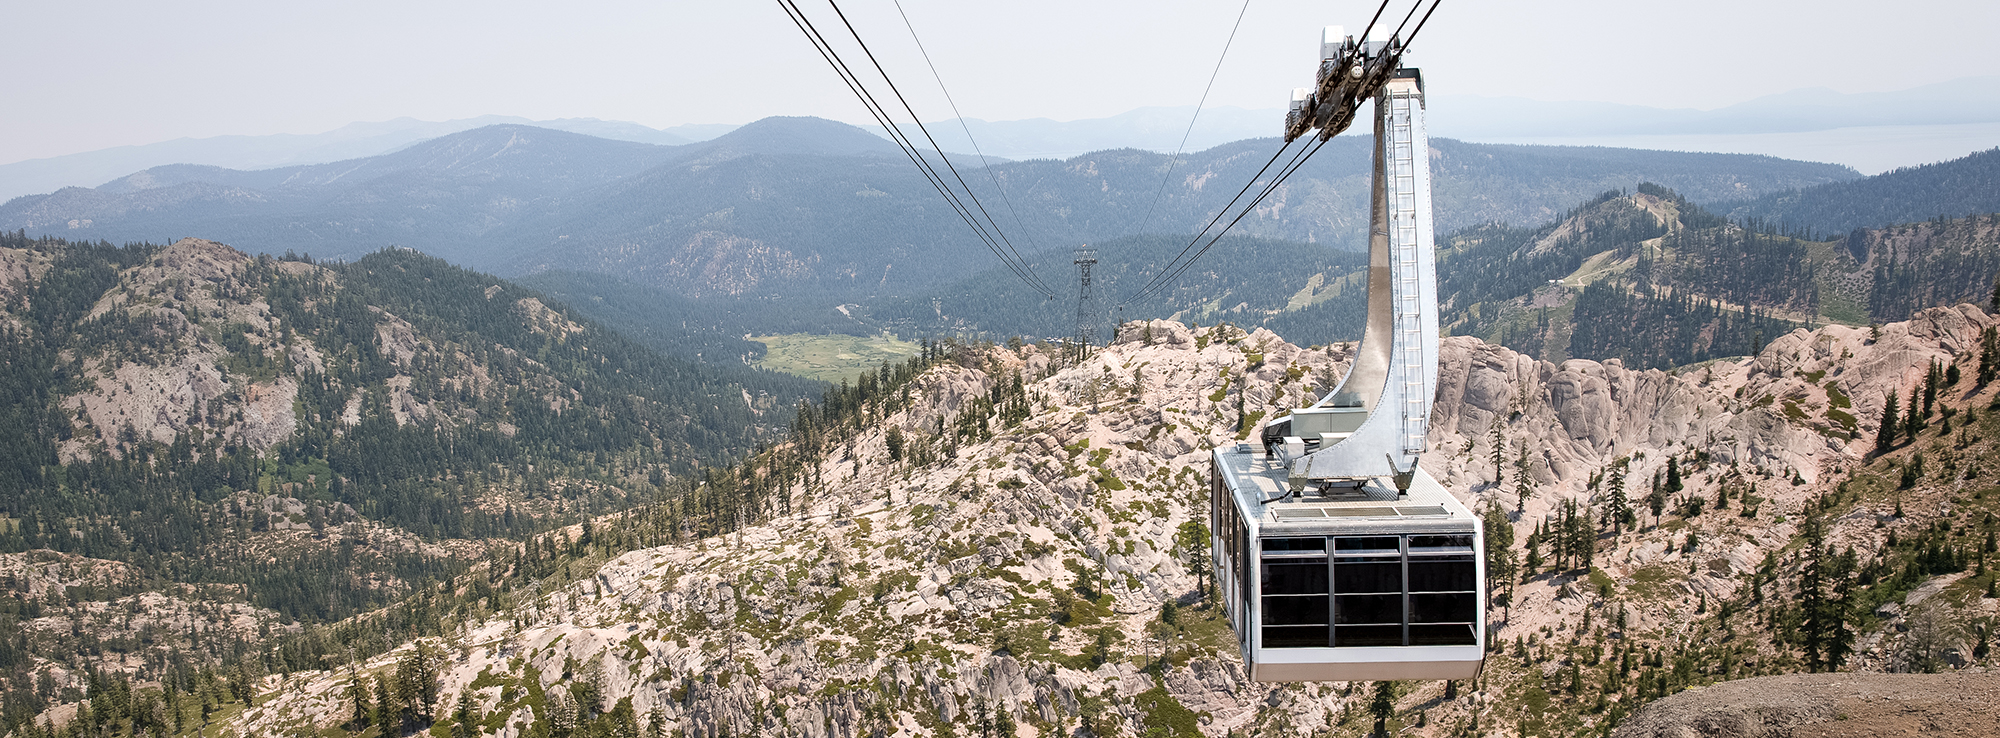 Tahoe things to do with kids - Aerial Tram